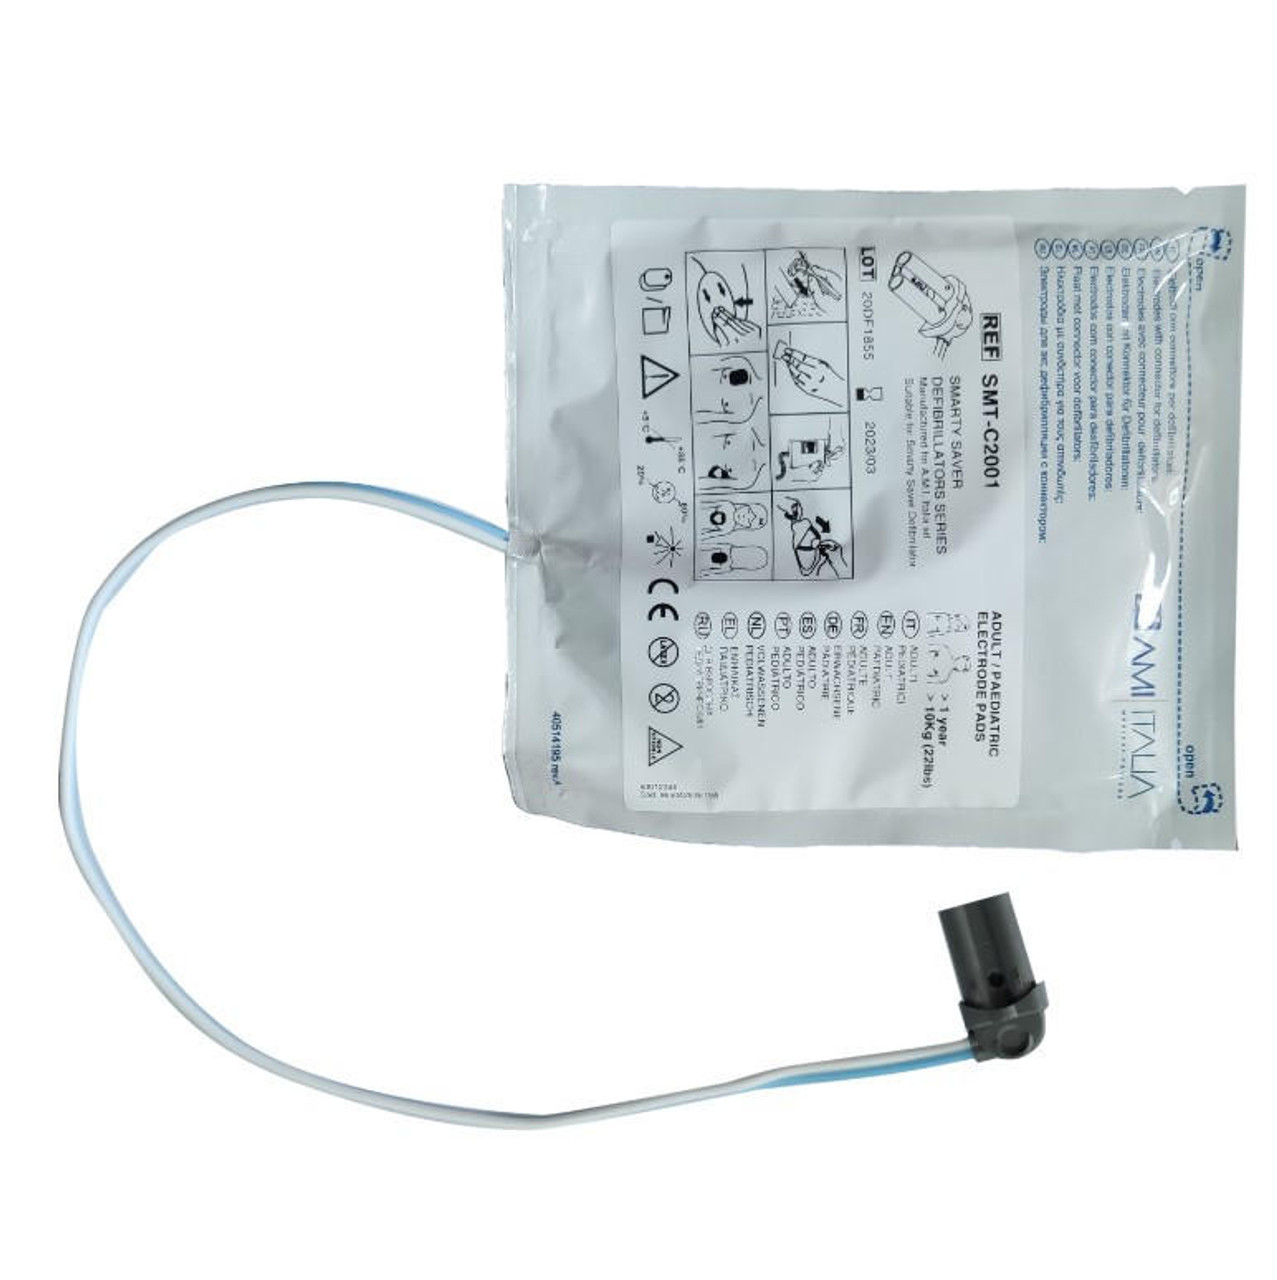 Disposable, Preconnected, Universal Defibrillator Pads for Smarty Saver Series